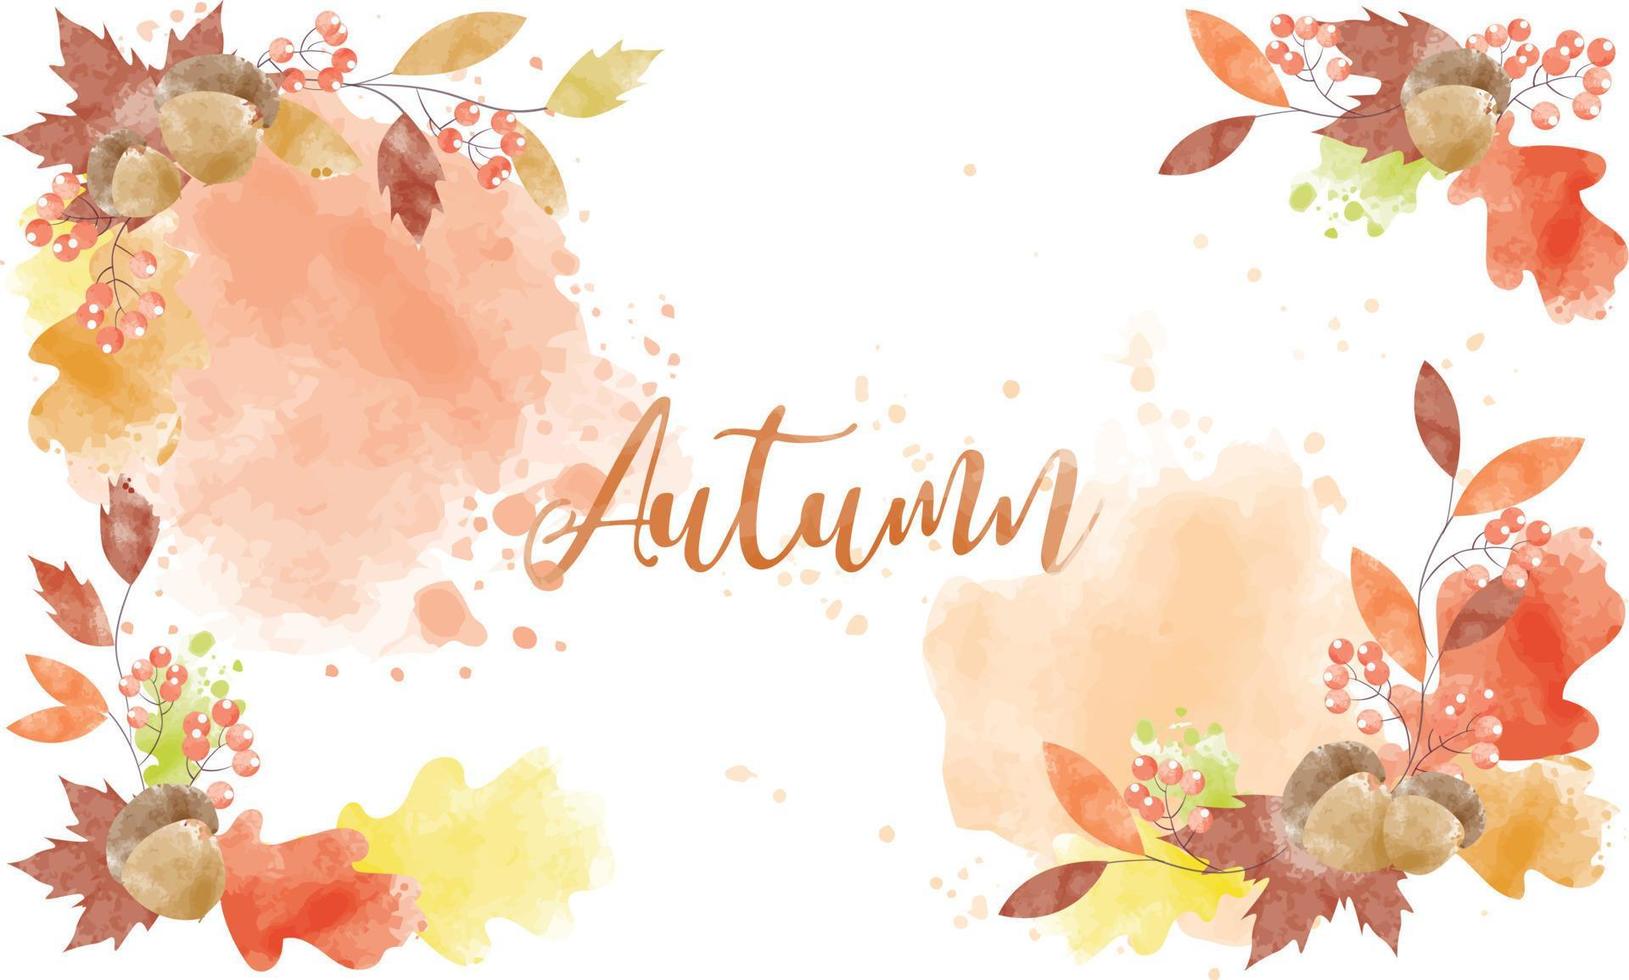 Watercolor abstract background autumn frame collection with seasonal leaves. Hand-painted watercolor natural art, perfect for your designed header, banner, web, wall, cards, etc. vector